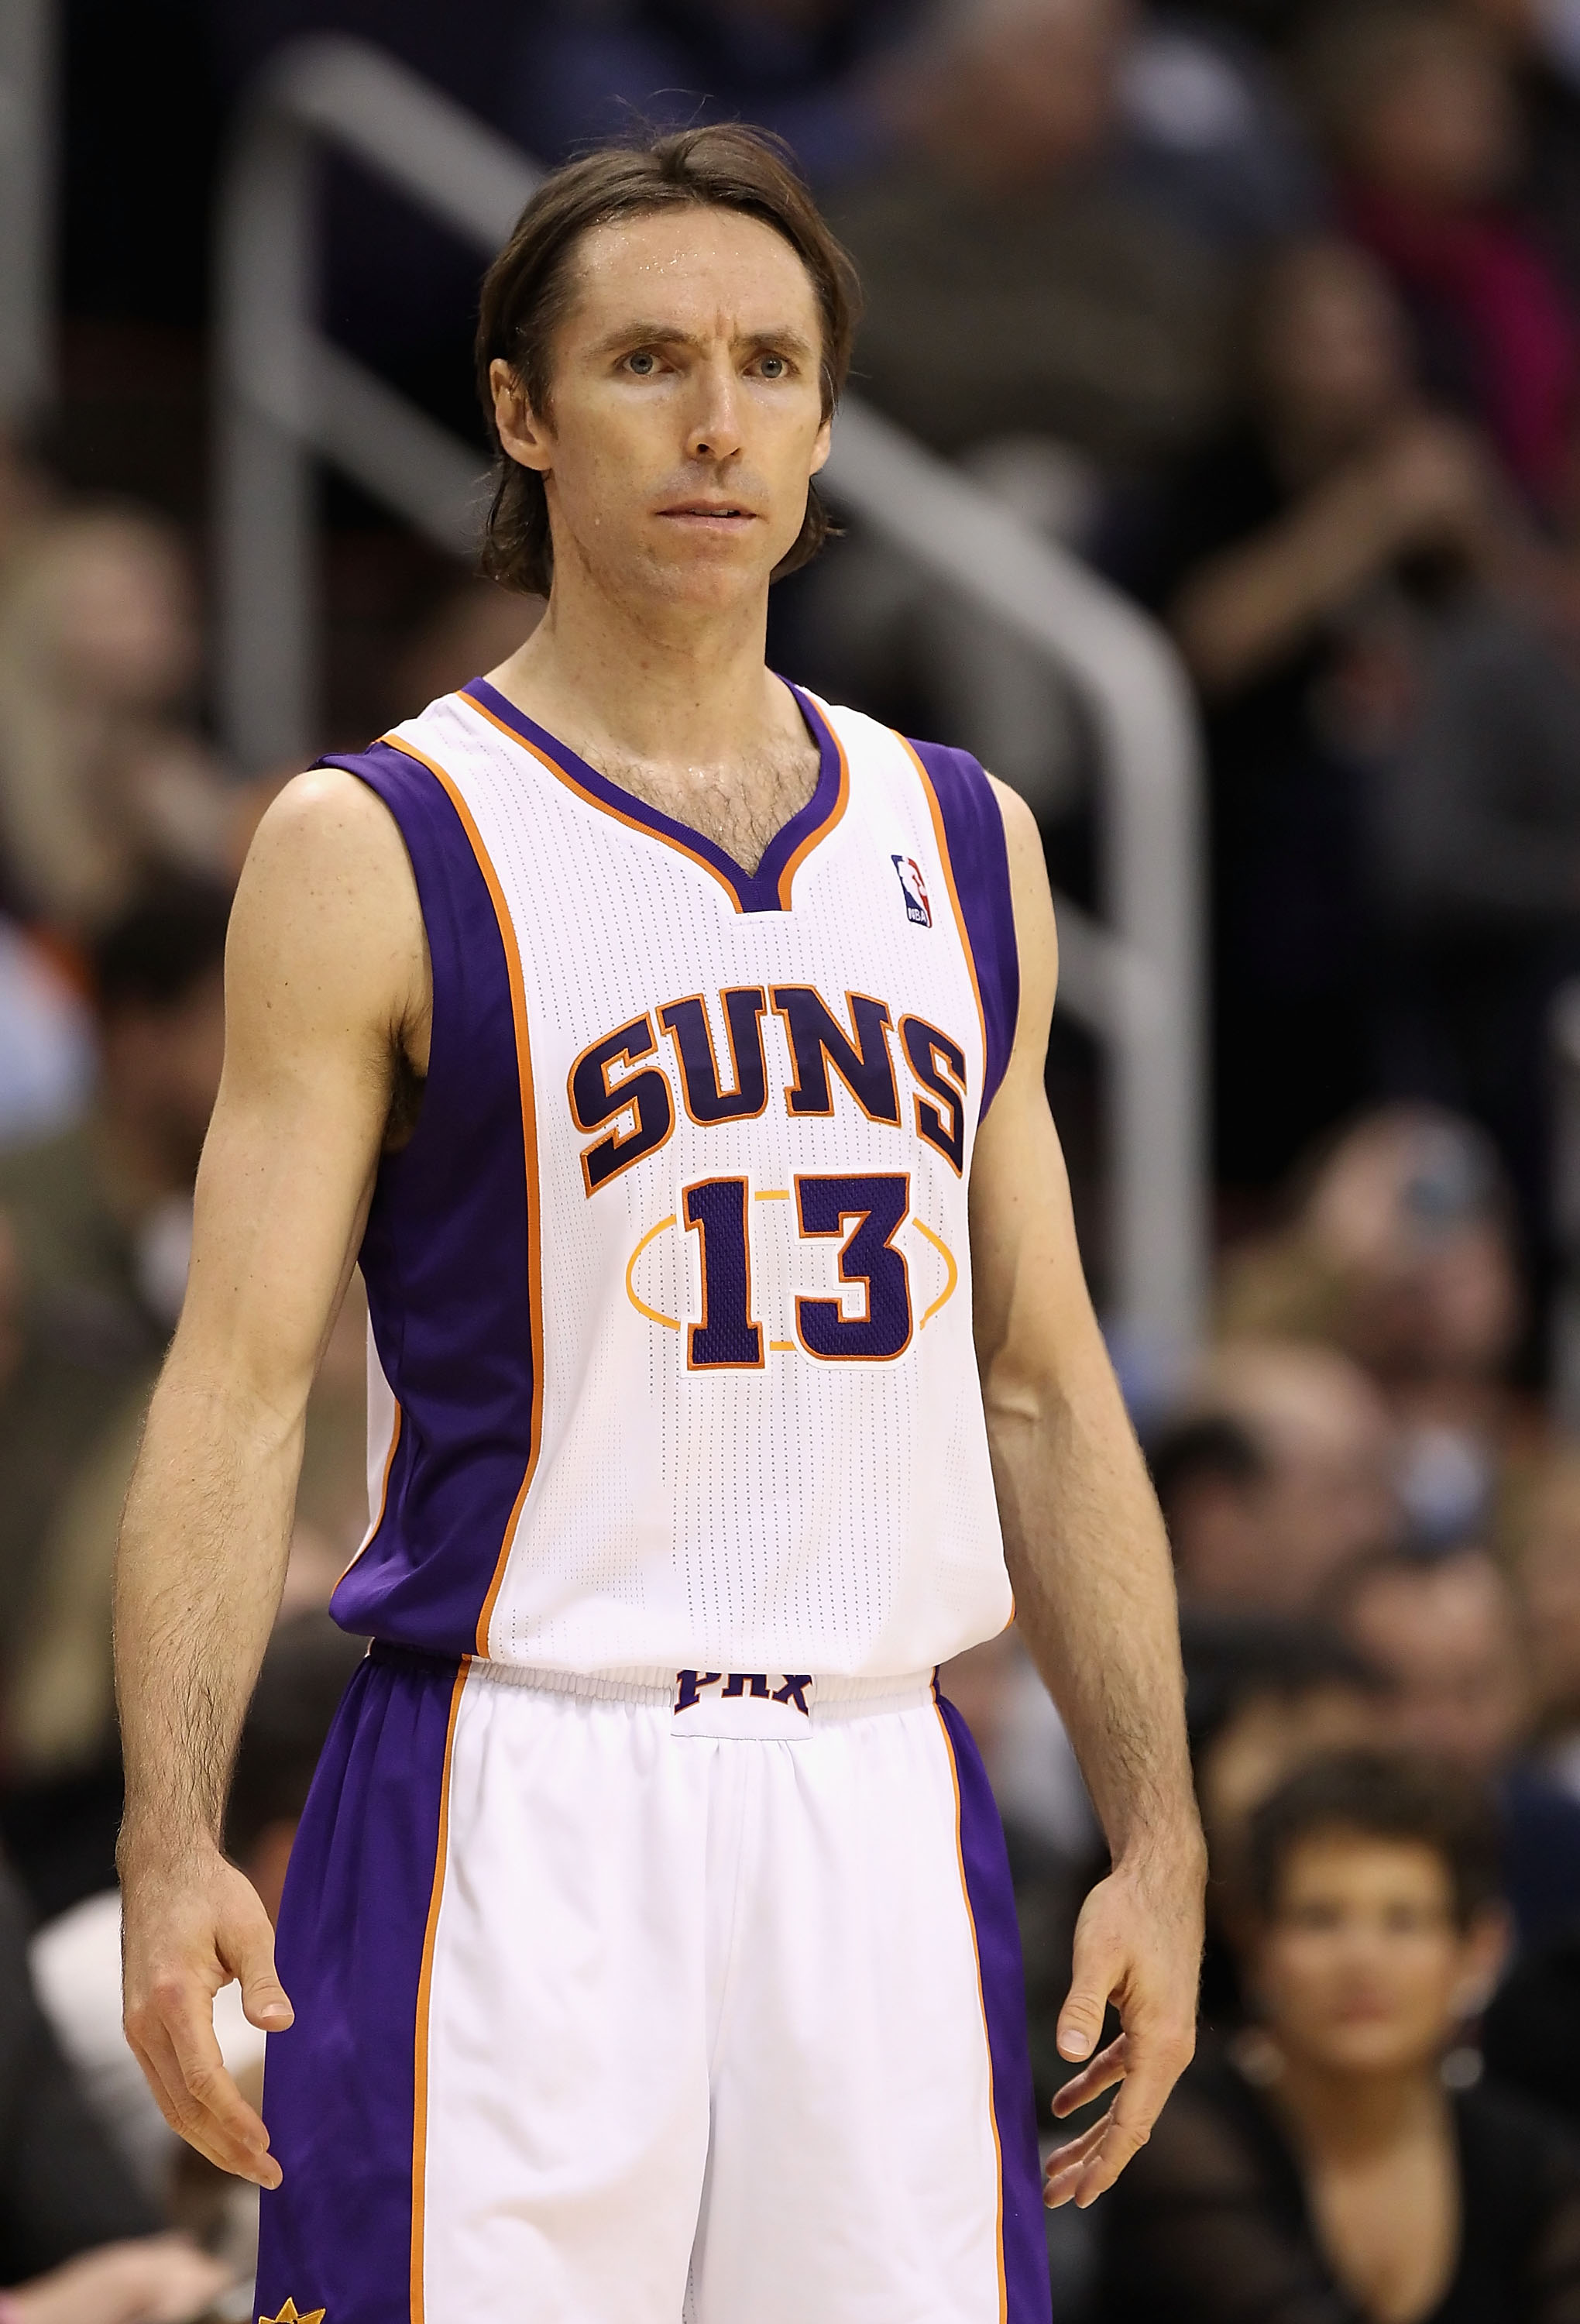 PHOENIX, AZ - JANUARY 05:  Steve Nash #13 of the Phoenix Suns during the NBA game against the Los Angeles Lakers at US Airways Center on January 5, 2011 in Phoenix, Arizona. The Lakers defeated the Suns 99-95.  NOTE TO USER: User expressly acknowledges an